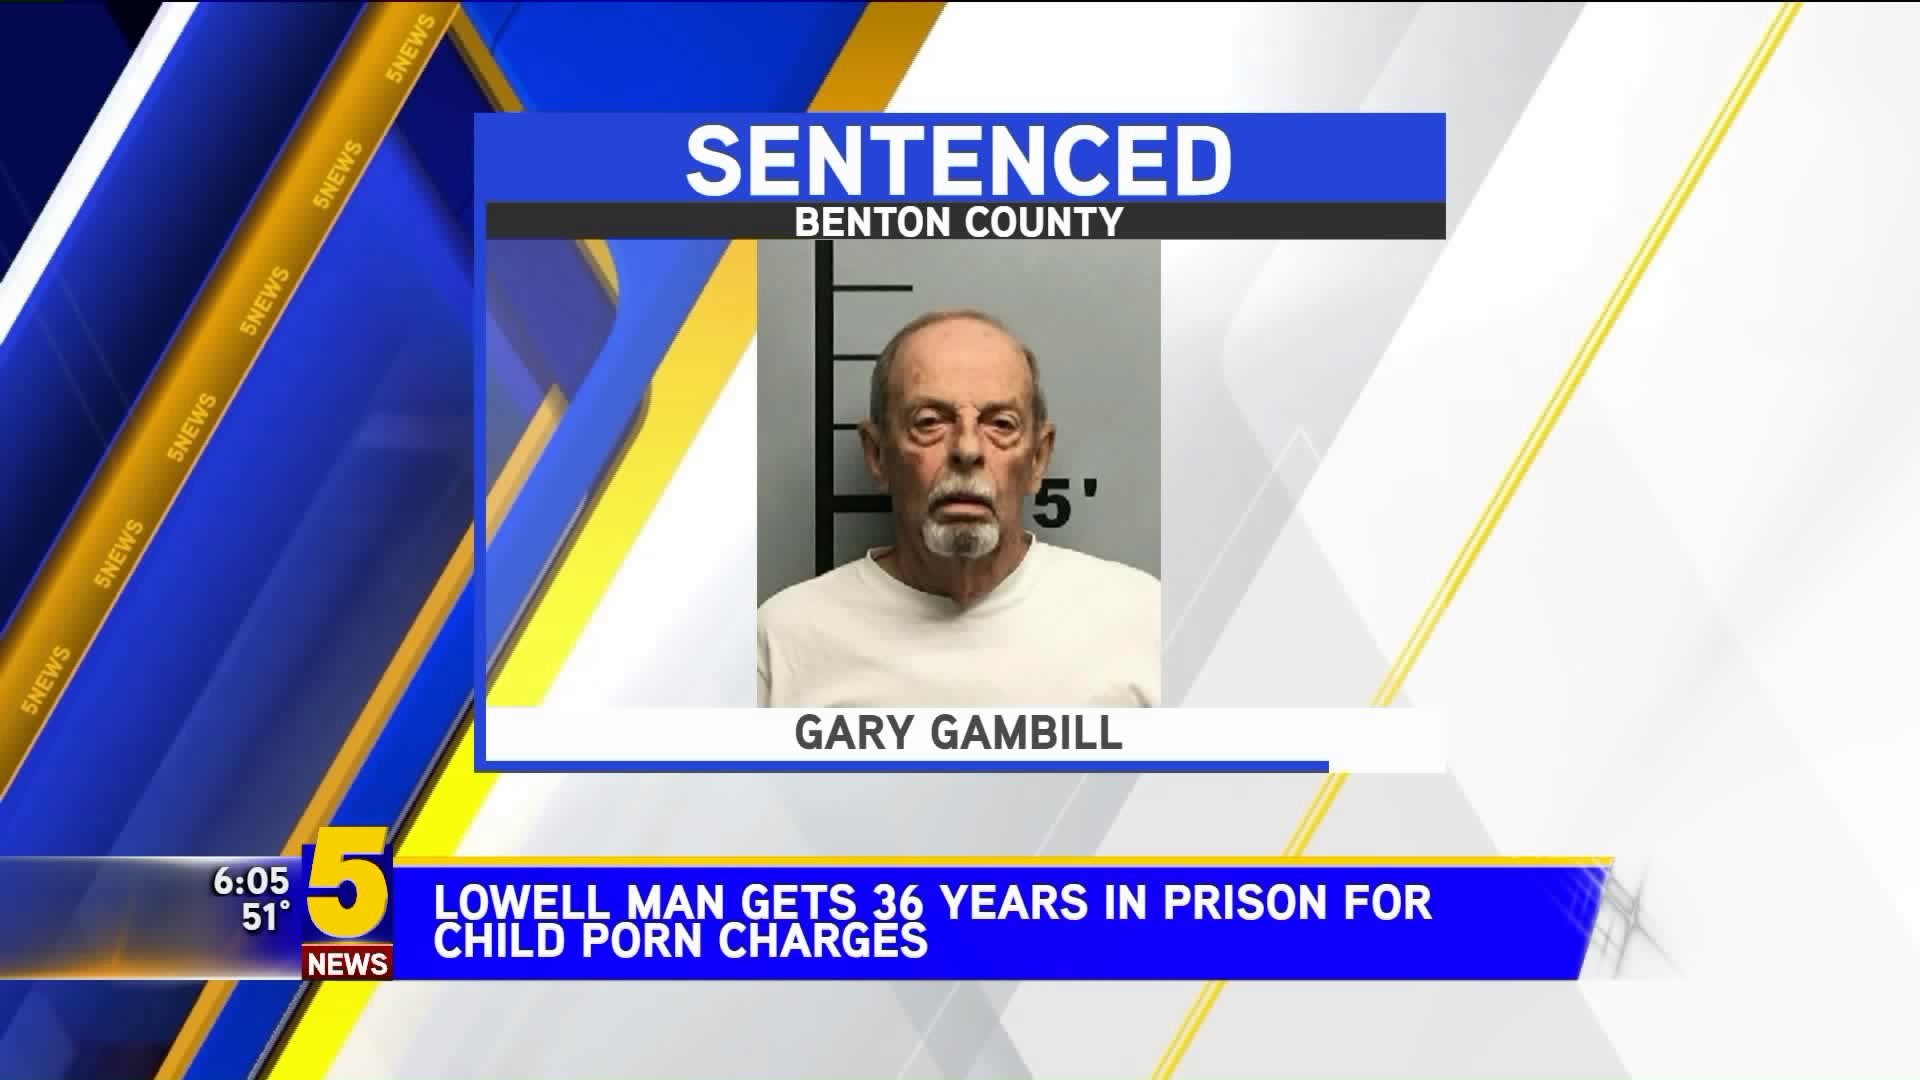 Lowell Man Gets 36 Years In Prison For Child Porn Charges